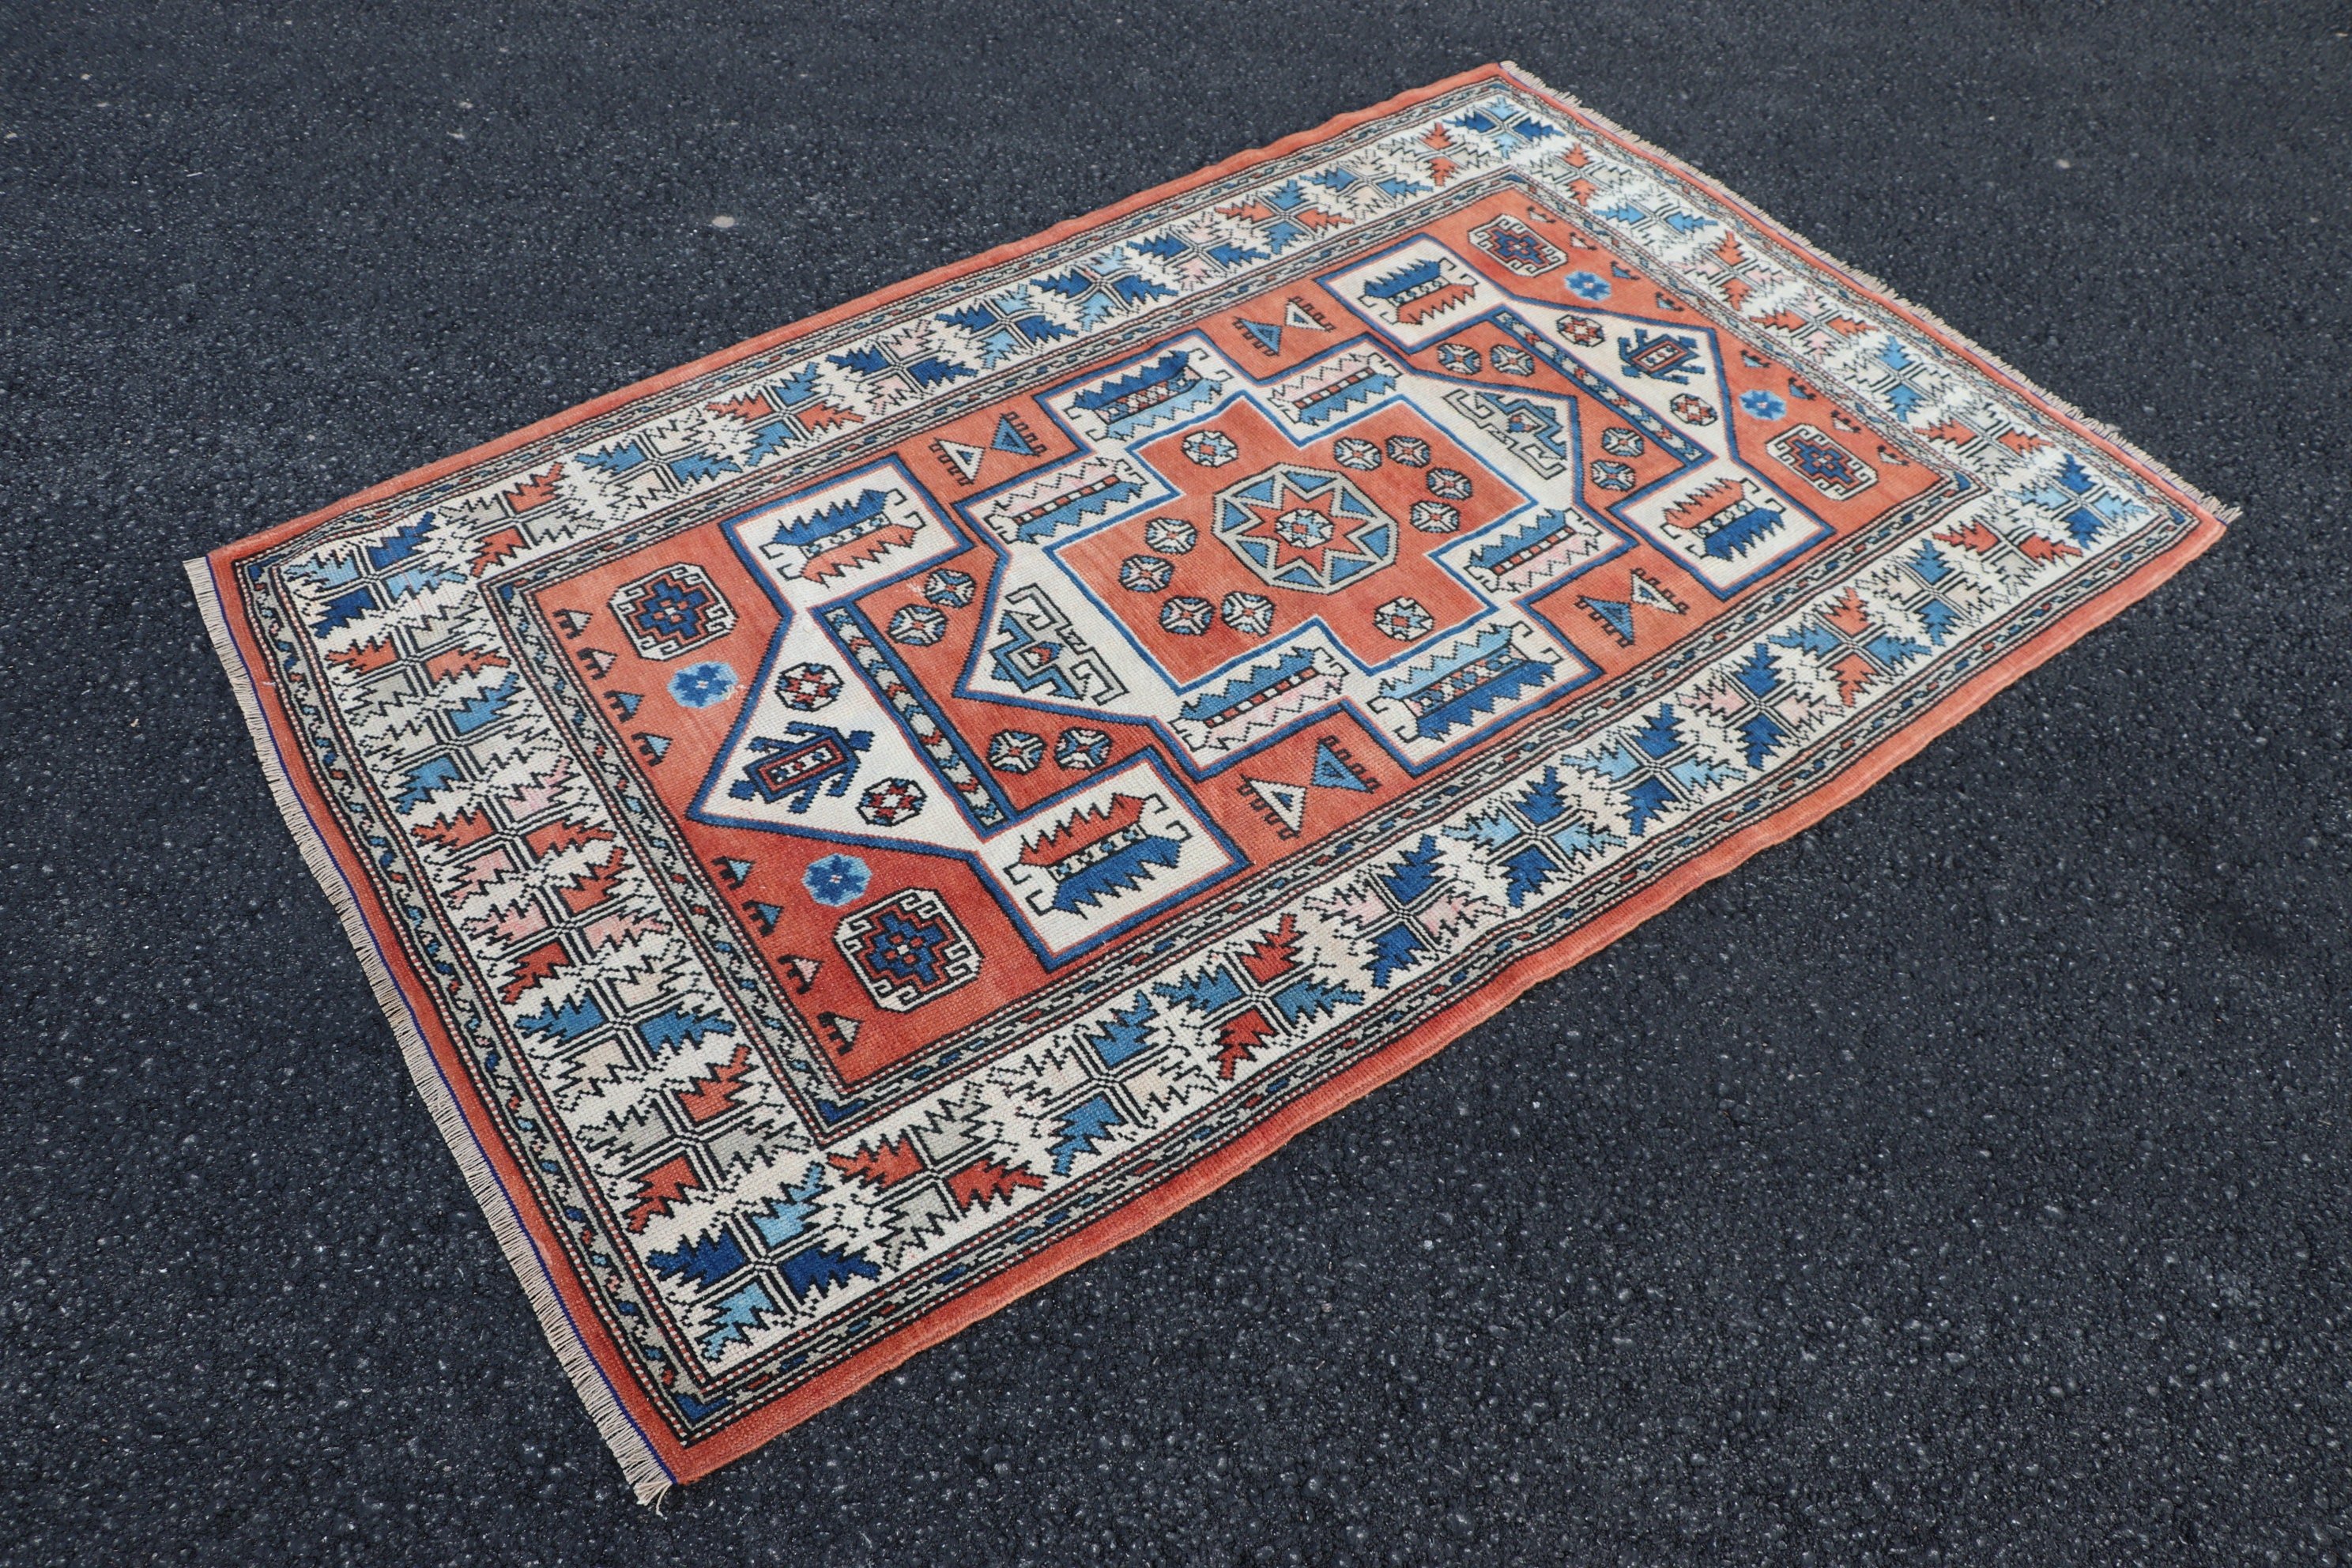 Vintage Rug, Rugs for Entry, 3.8x6.3 ft Accent Rugs, Nursery Rug, Moroccan Rug, Red Kitchen Rugs, Bedroom Rug, Turkish Rug